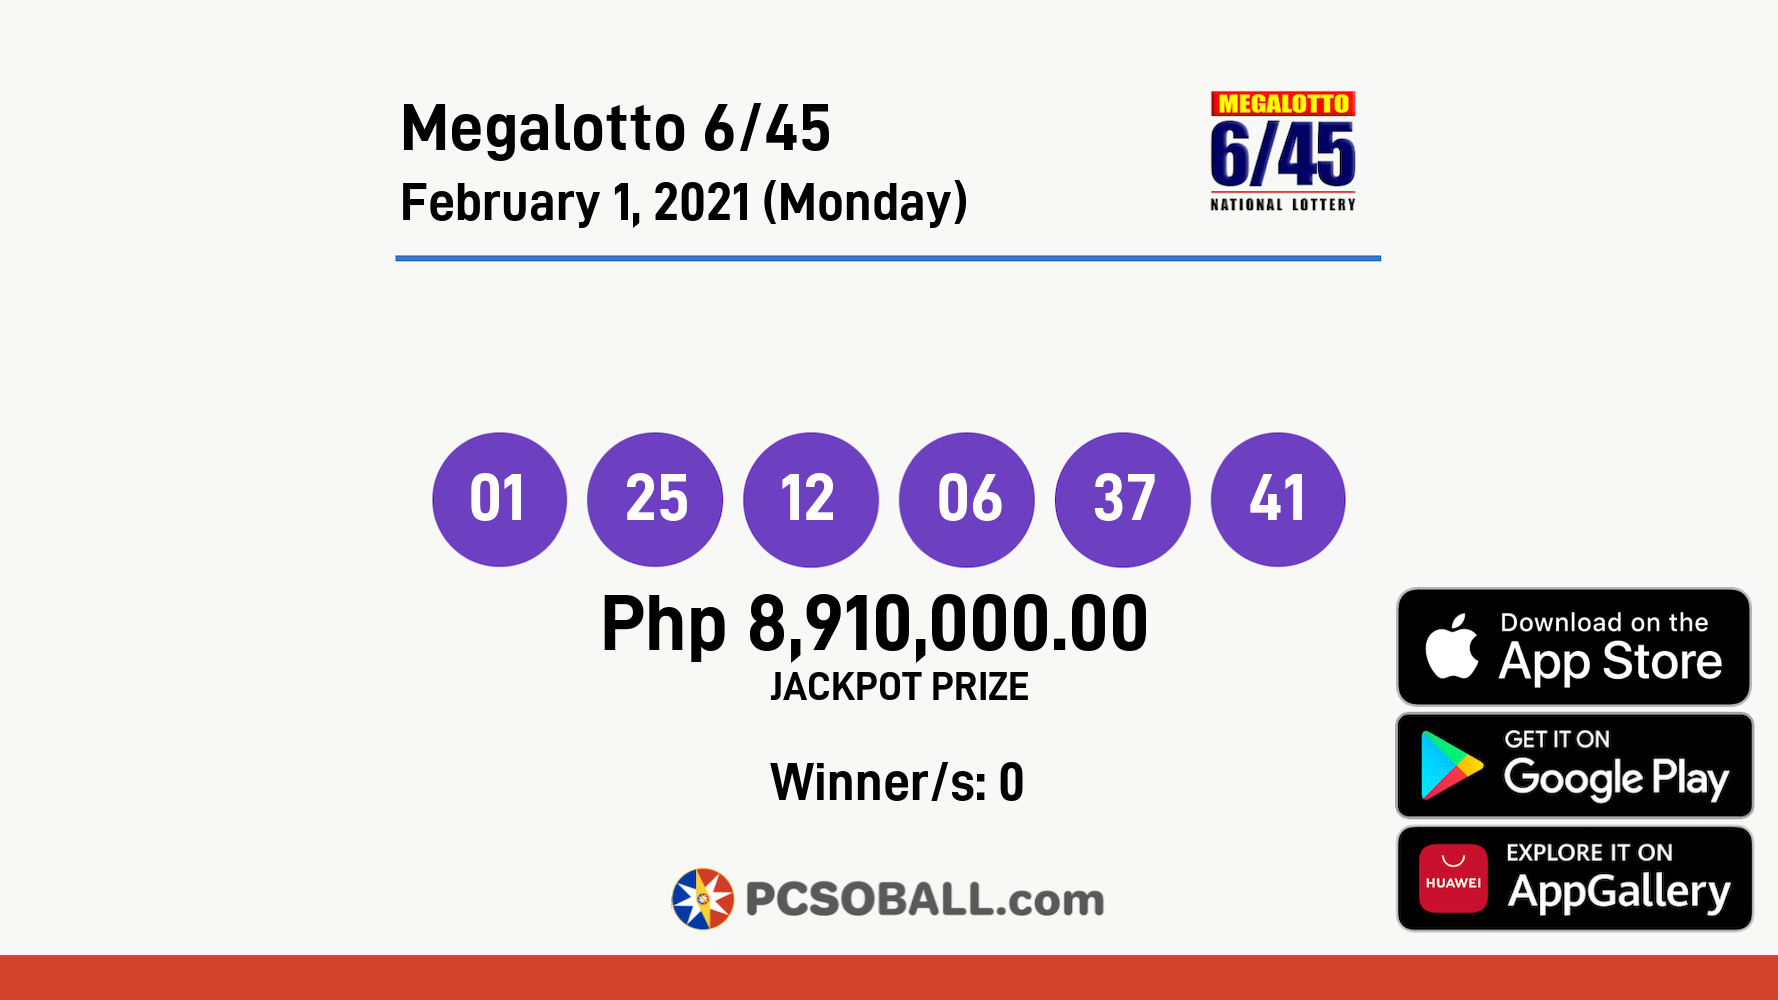 Megalotto 6/45 February 1, 2021 (Monday) Result